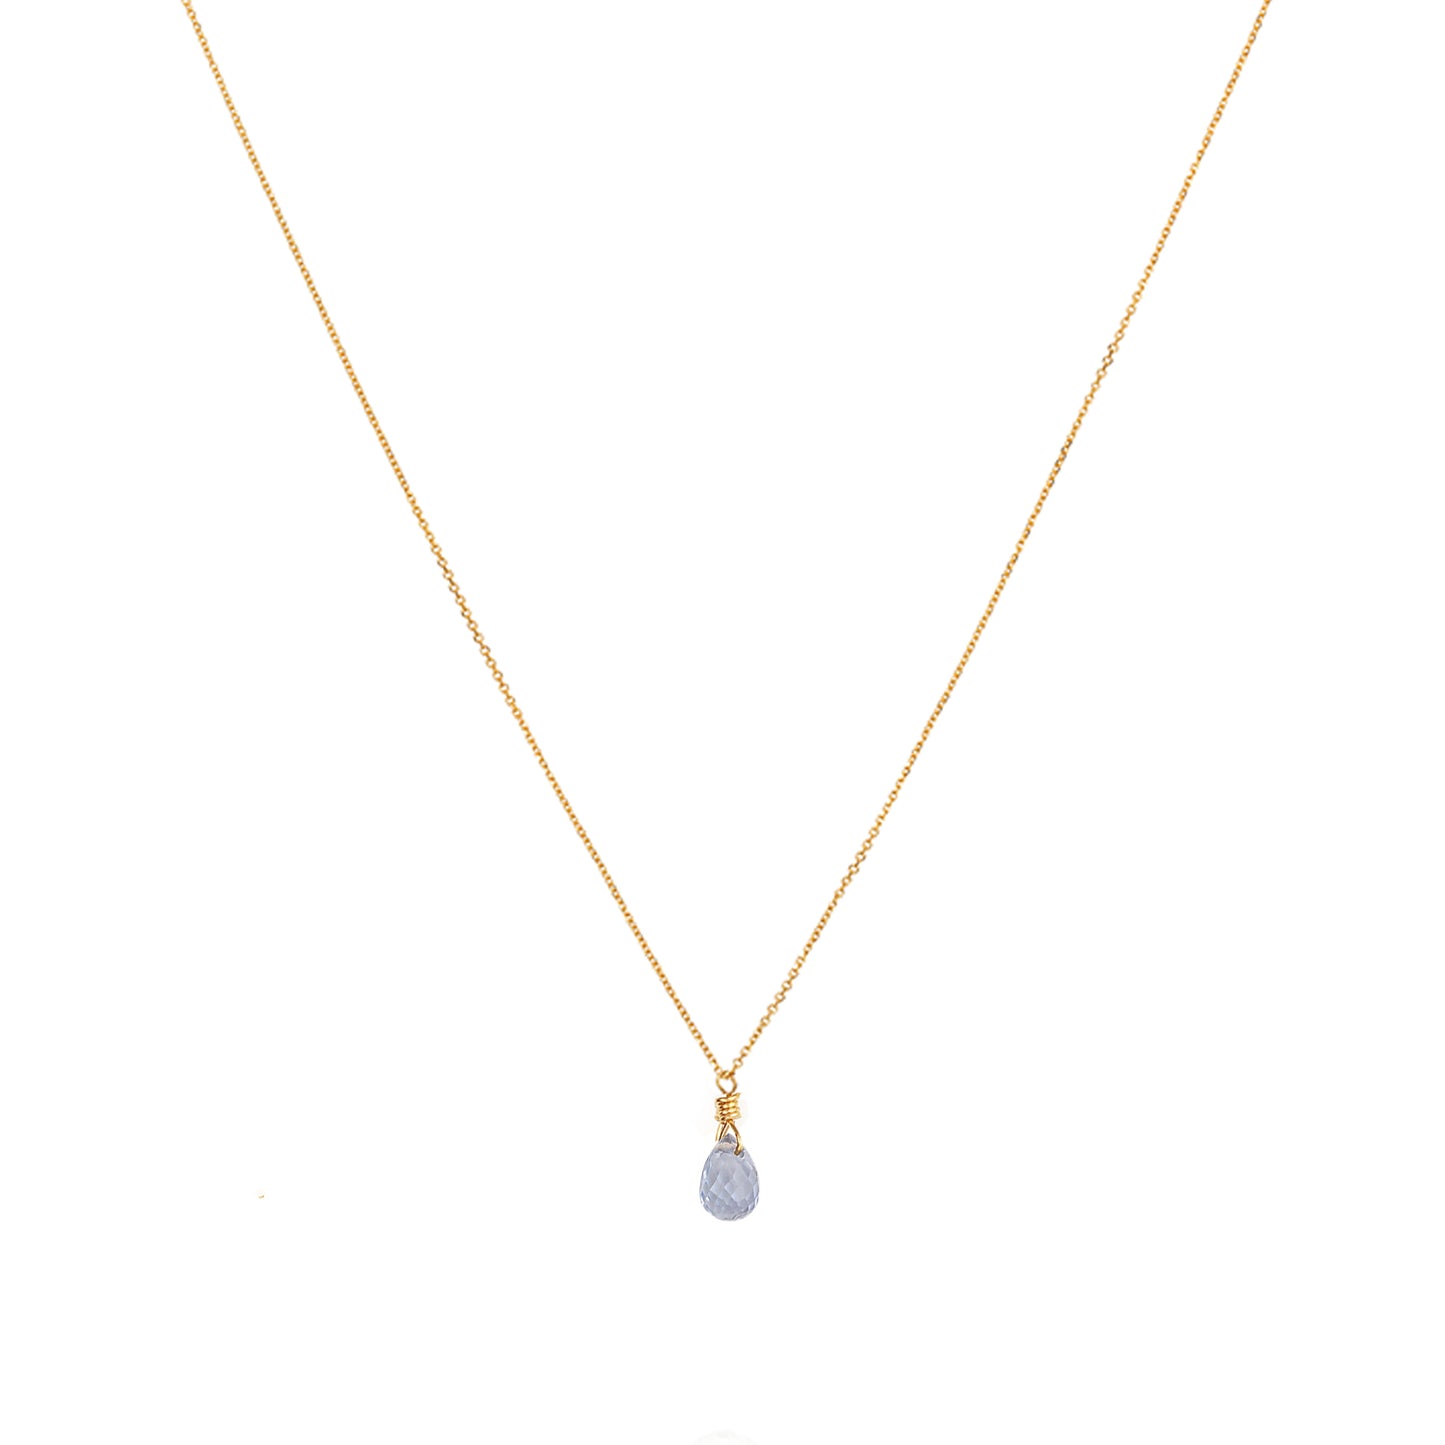 18ct yellow gold chain necklace with cornflower blue sapphire briolette drop